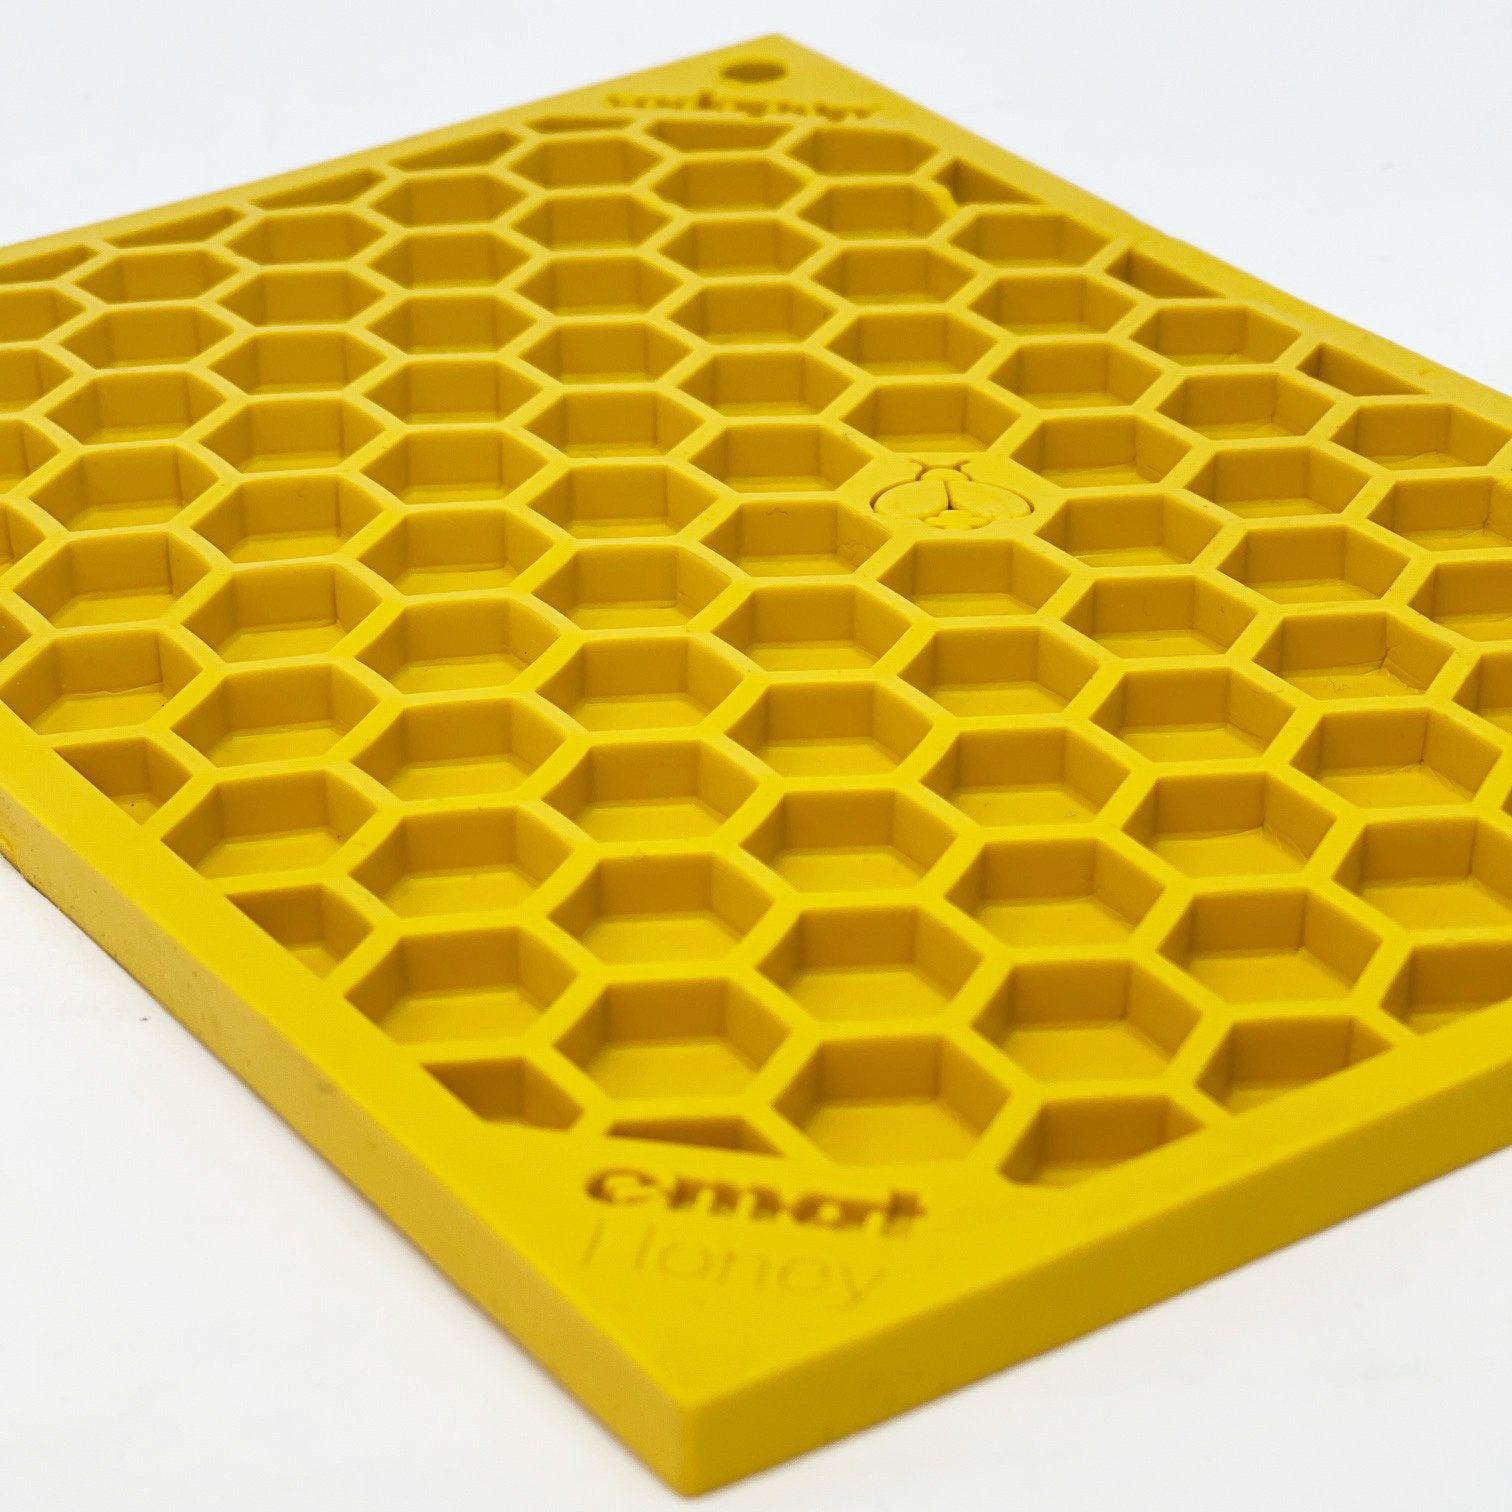 A yellow plastic tray with a honeycomb pattern that is perfect for SALE: Soda Pup EMAT ENRICHMENT LICKING MAT by Your Whole Dog and encourages licking.